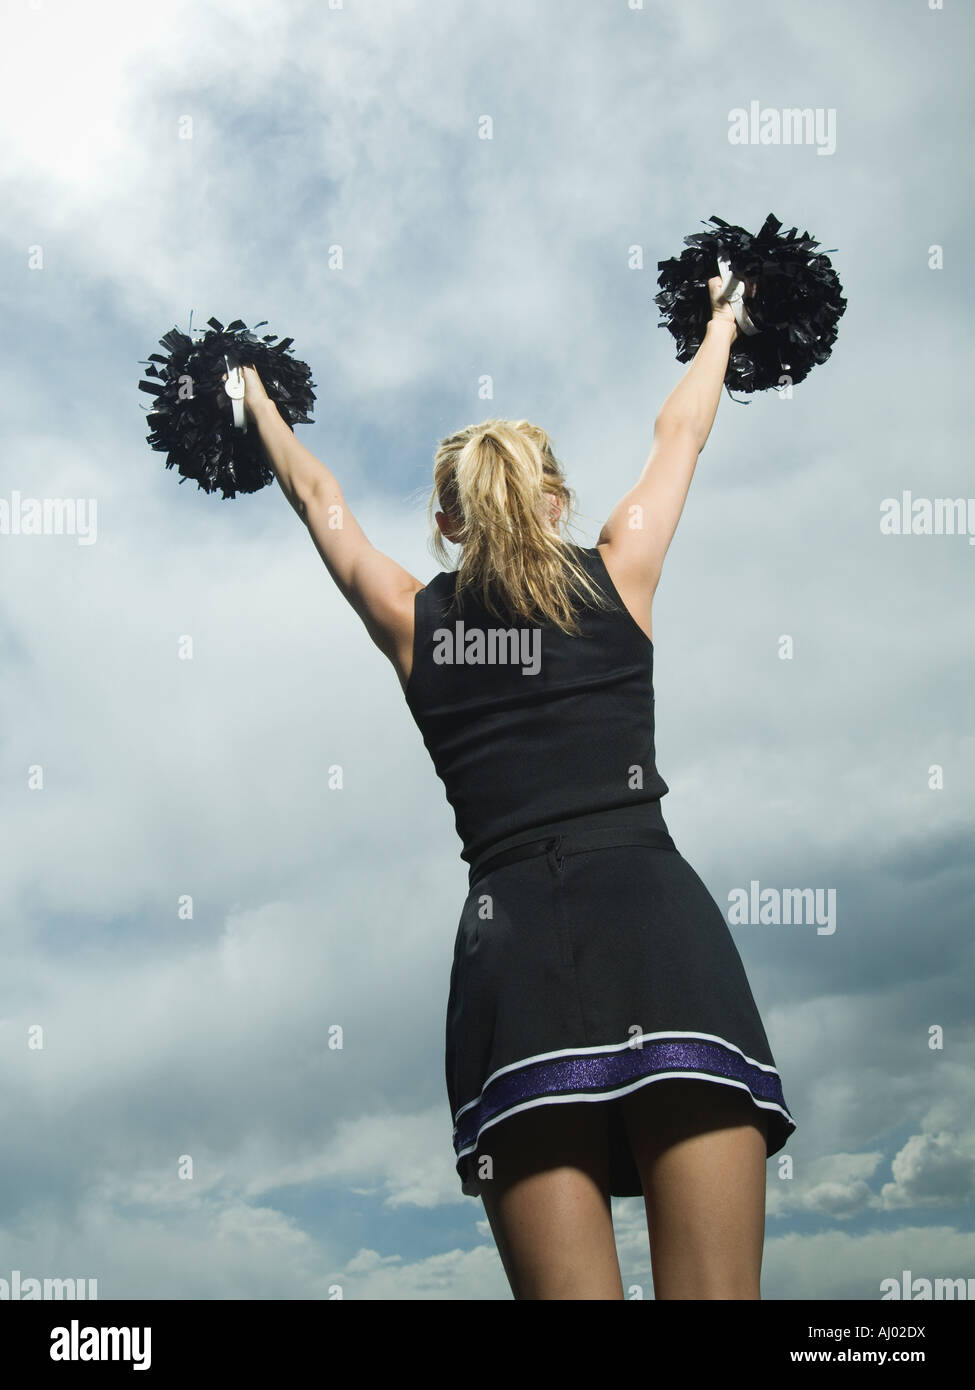 Pom Girls High Resolution Stock Photography and Images - Alamy